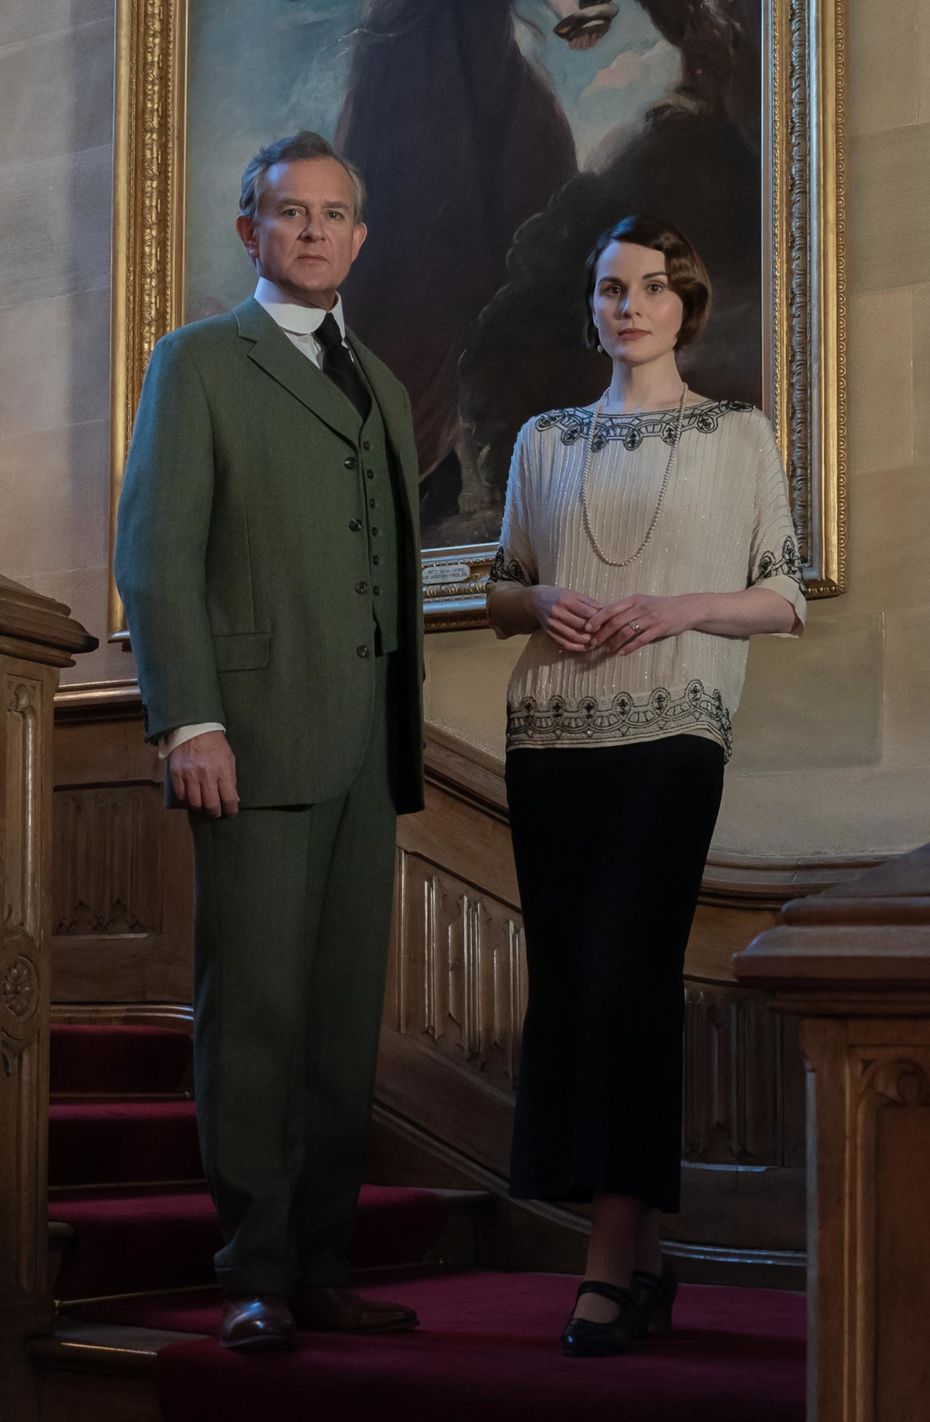 Hugh Bonneville as Robert Grantham AND Michelle Dockery as Lady Mary standing on the main stairwell of Downton Abbey